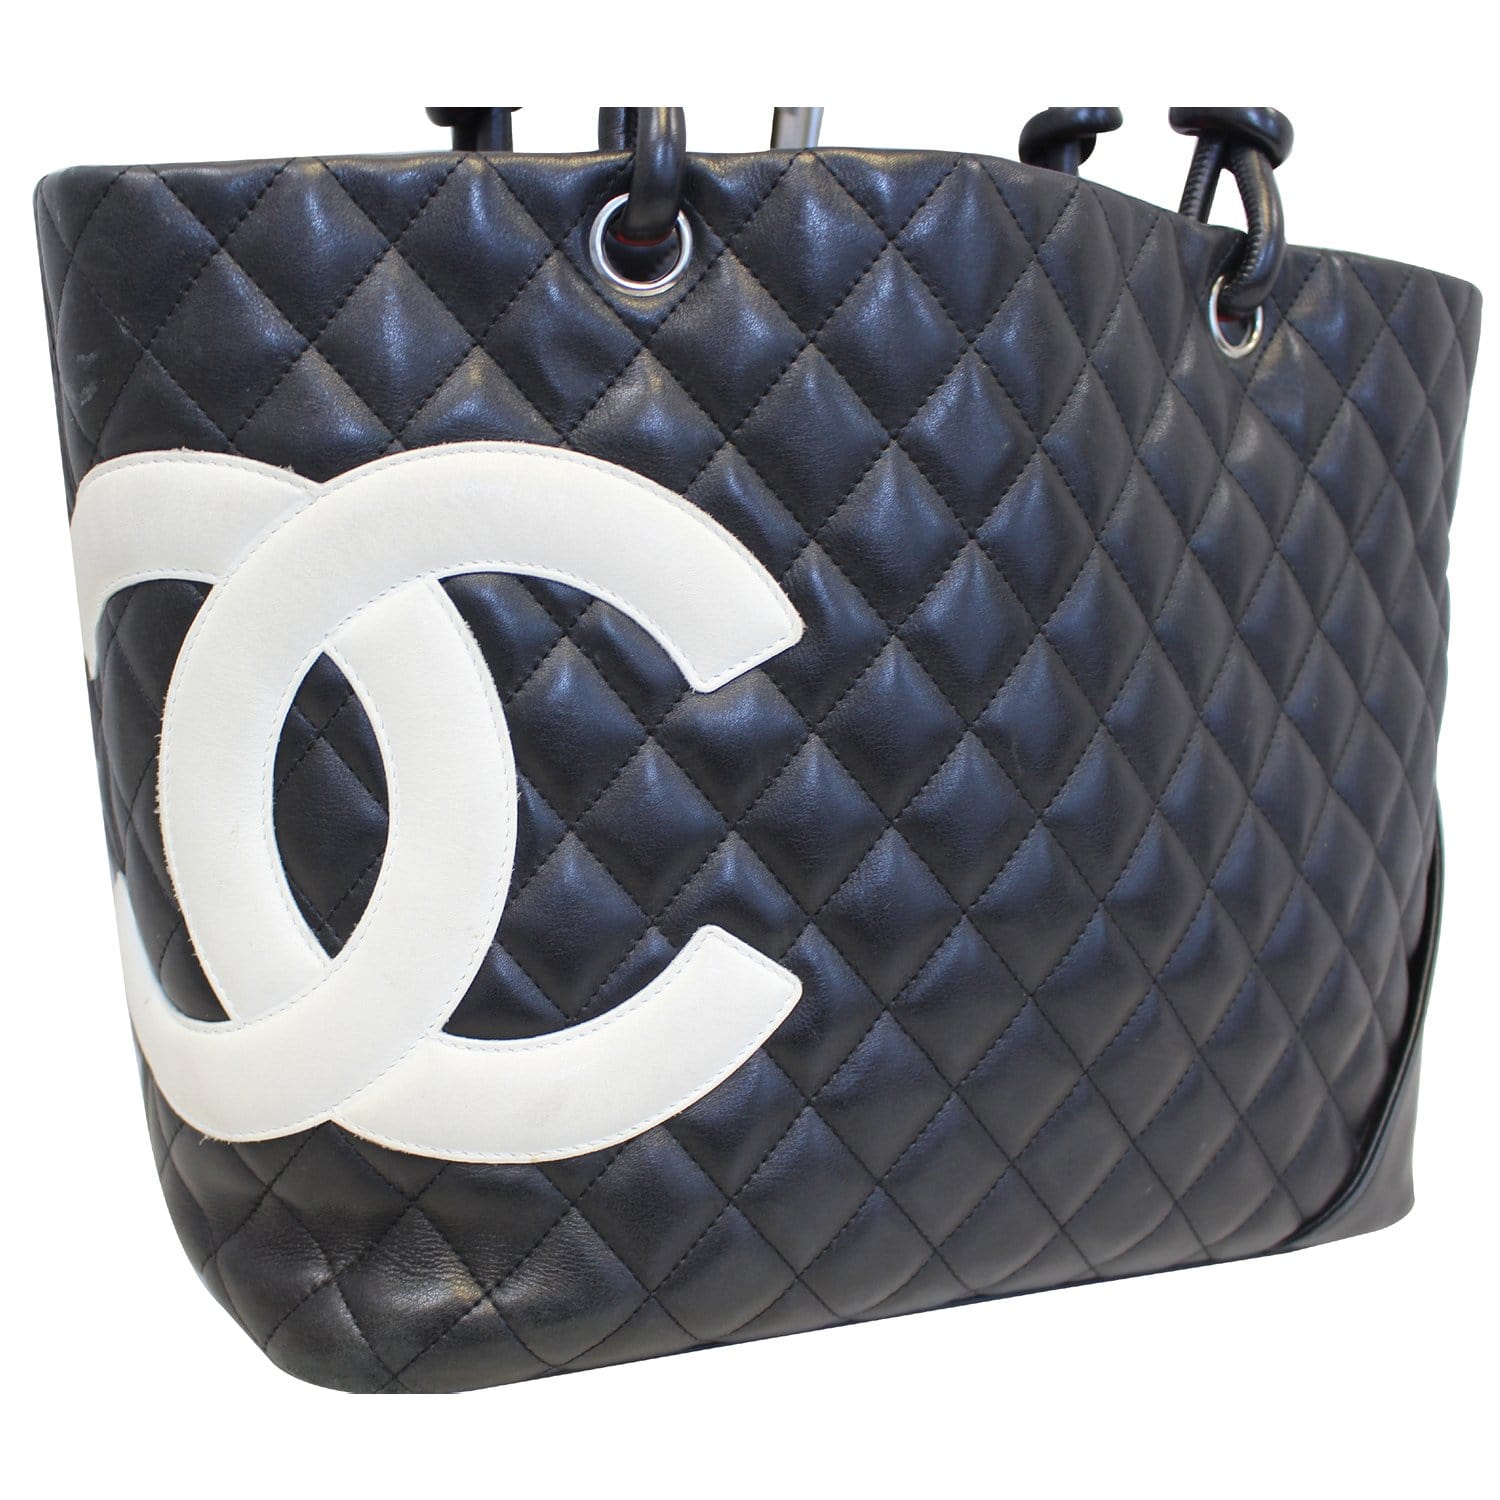 Cambon small rectangle leather handbag Chanel Black in Leather